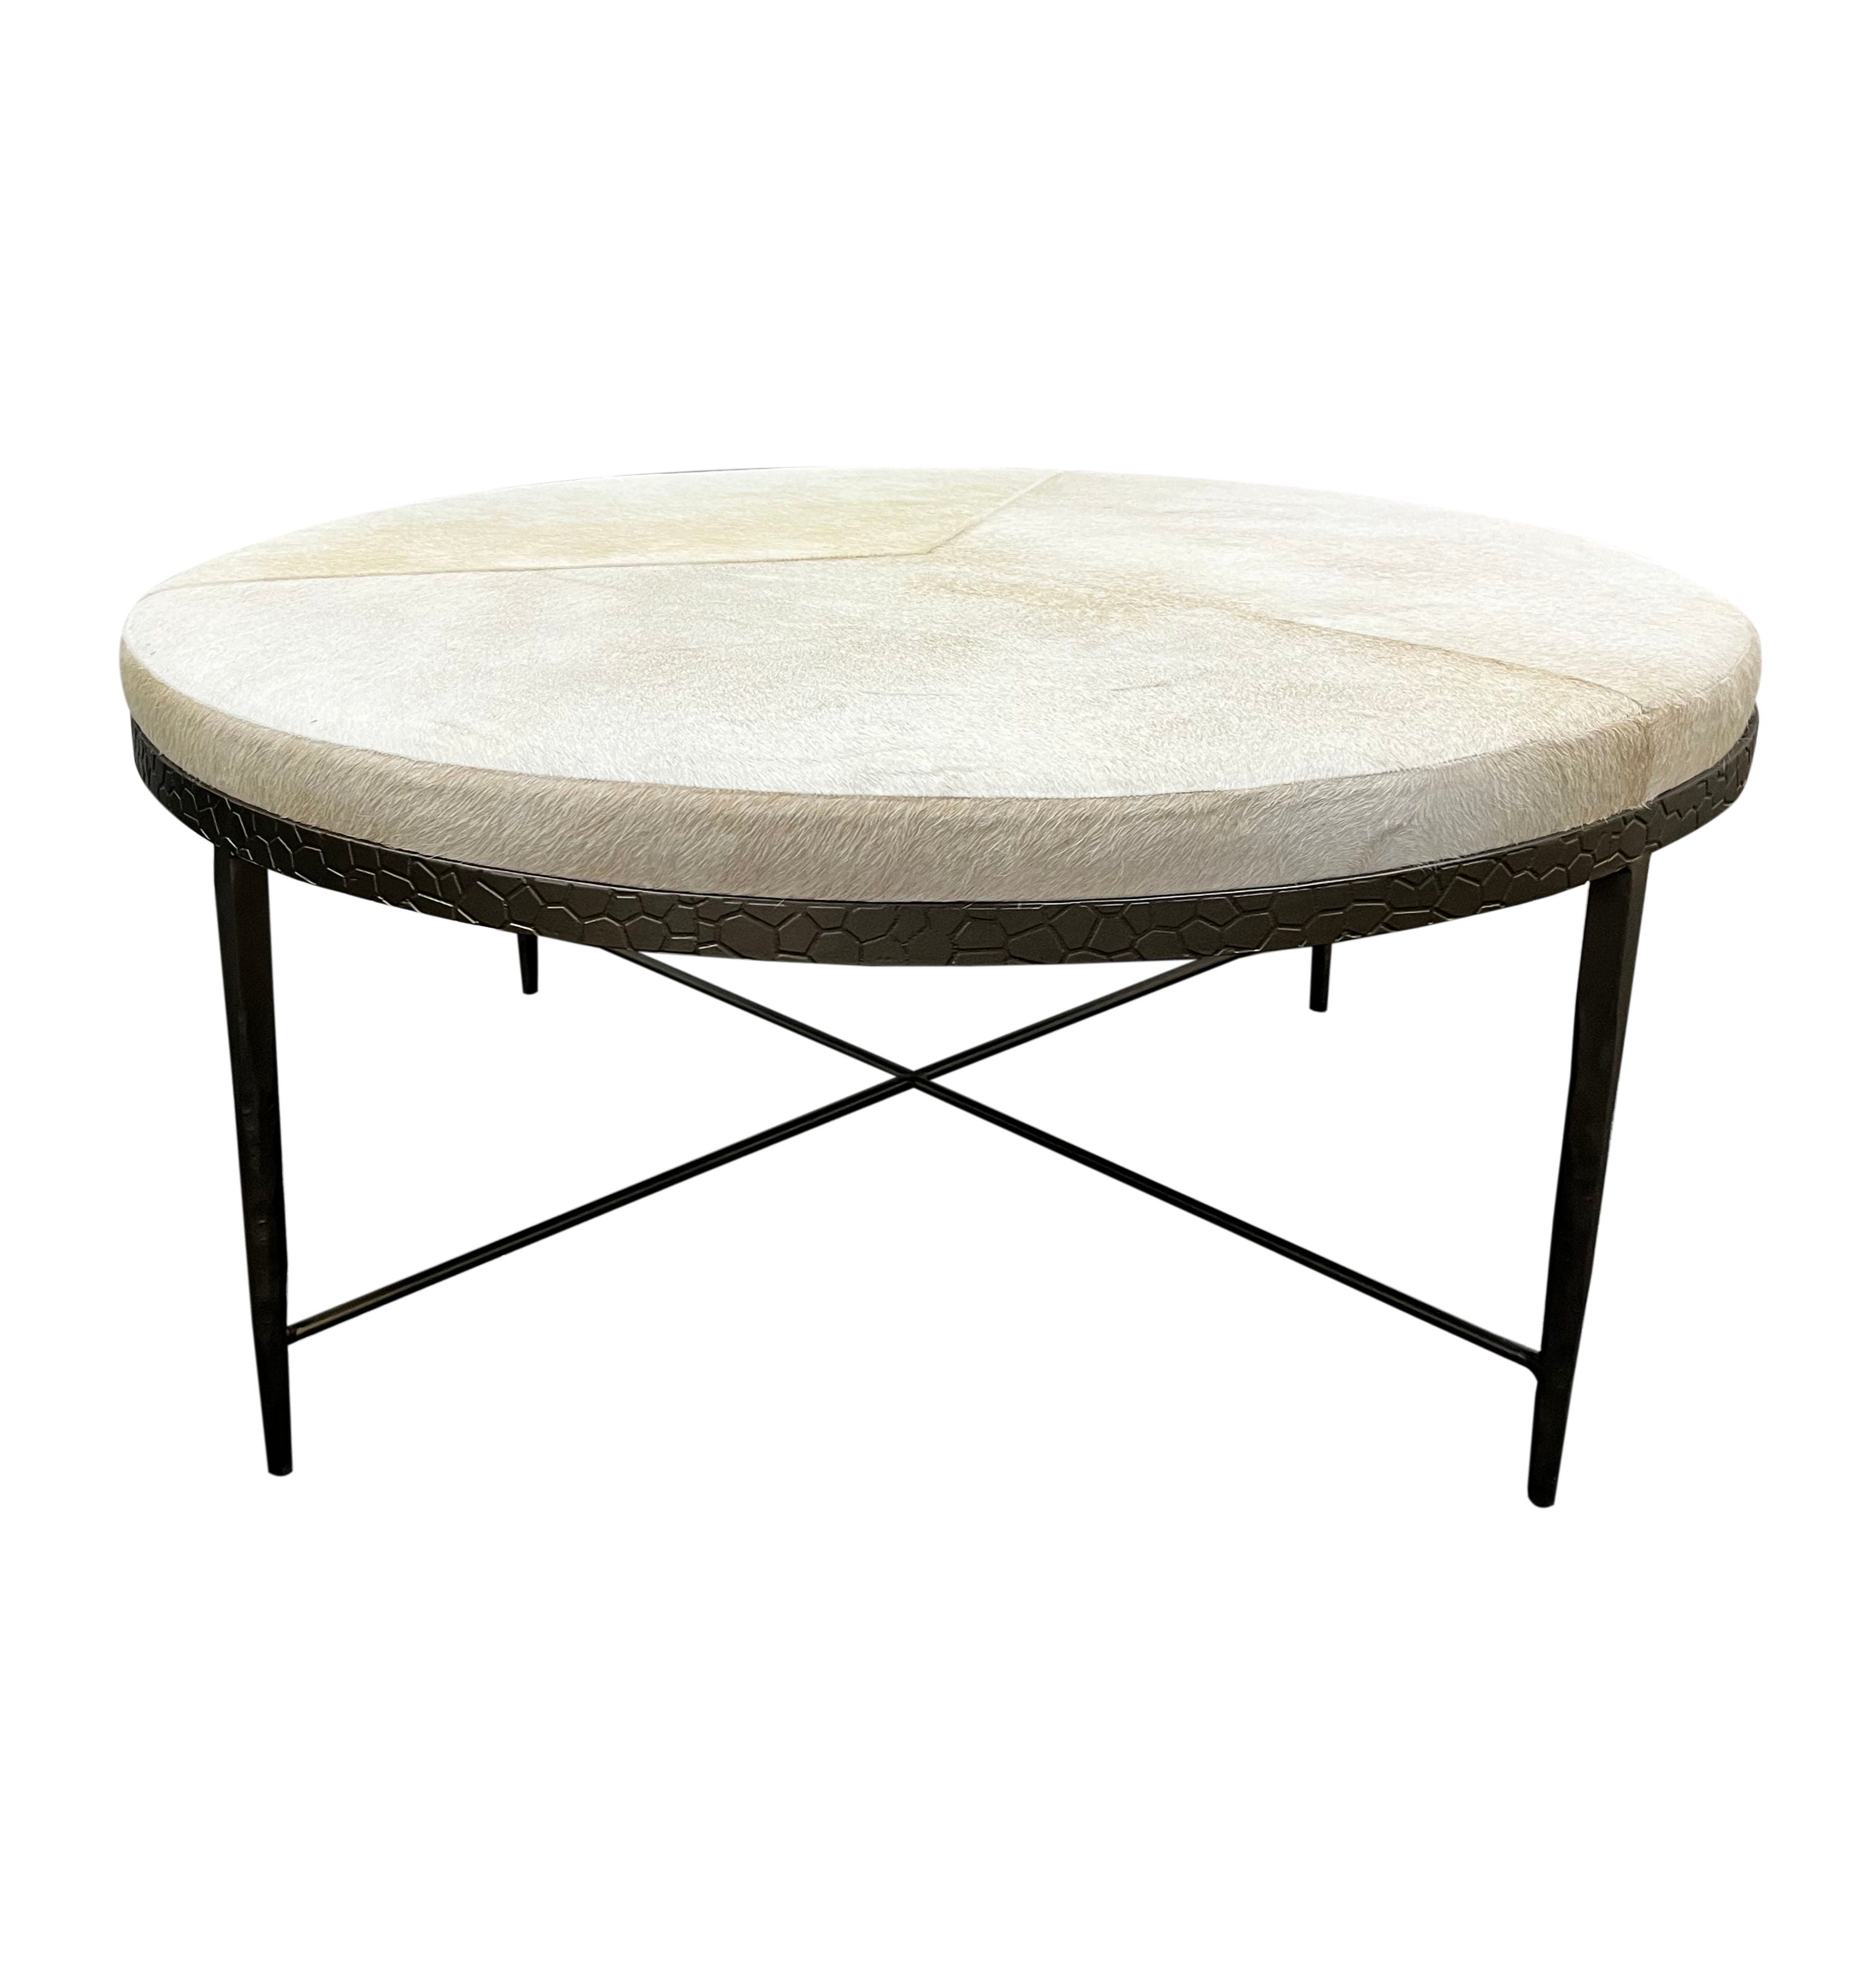 Bose - Hide Round Coffee Table - Ivory